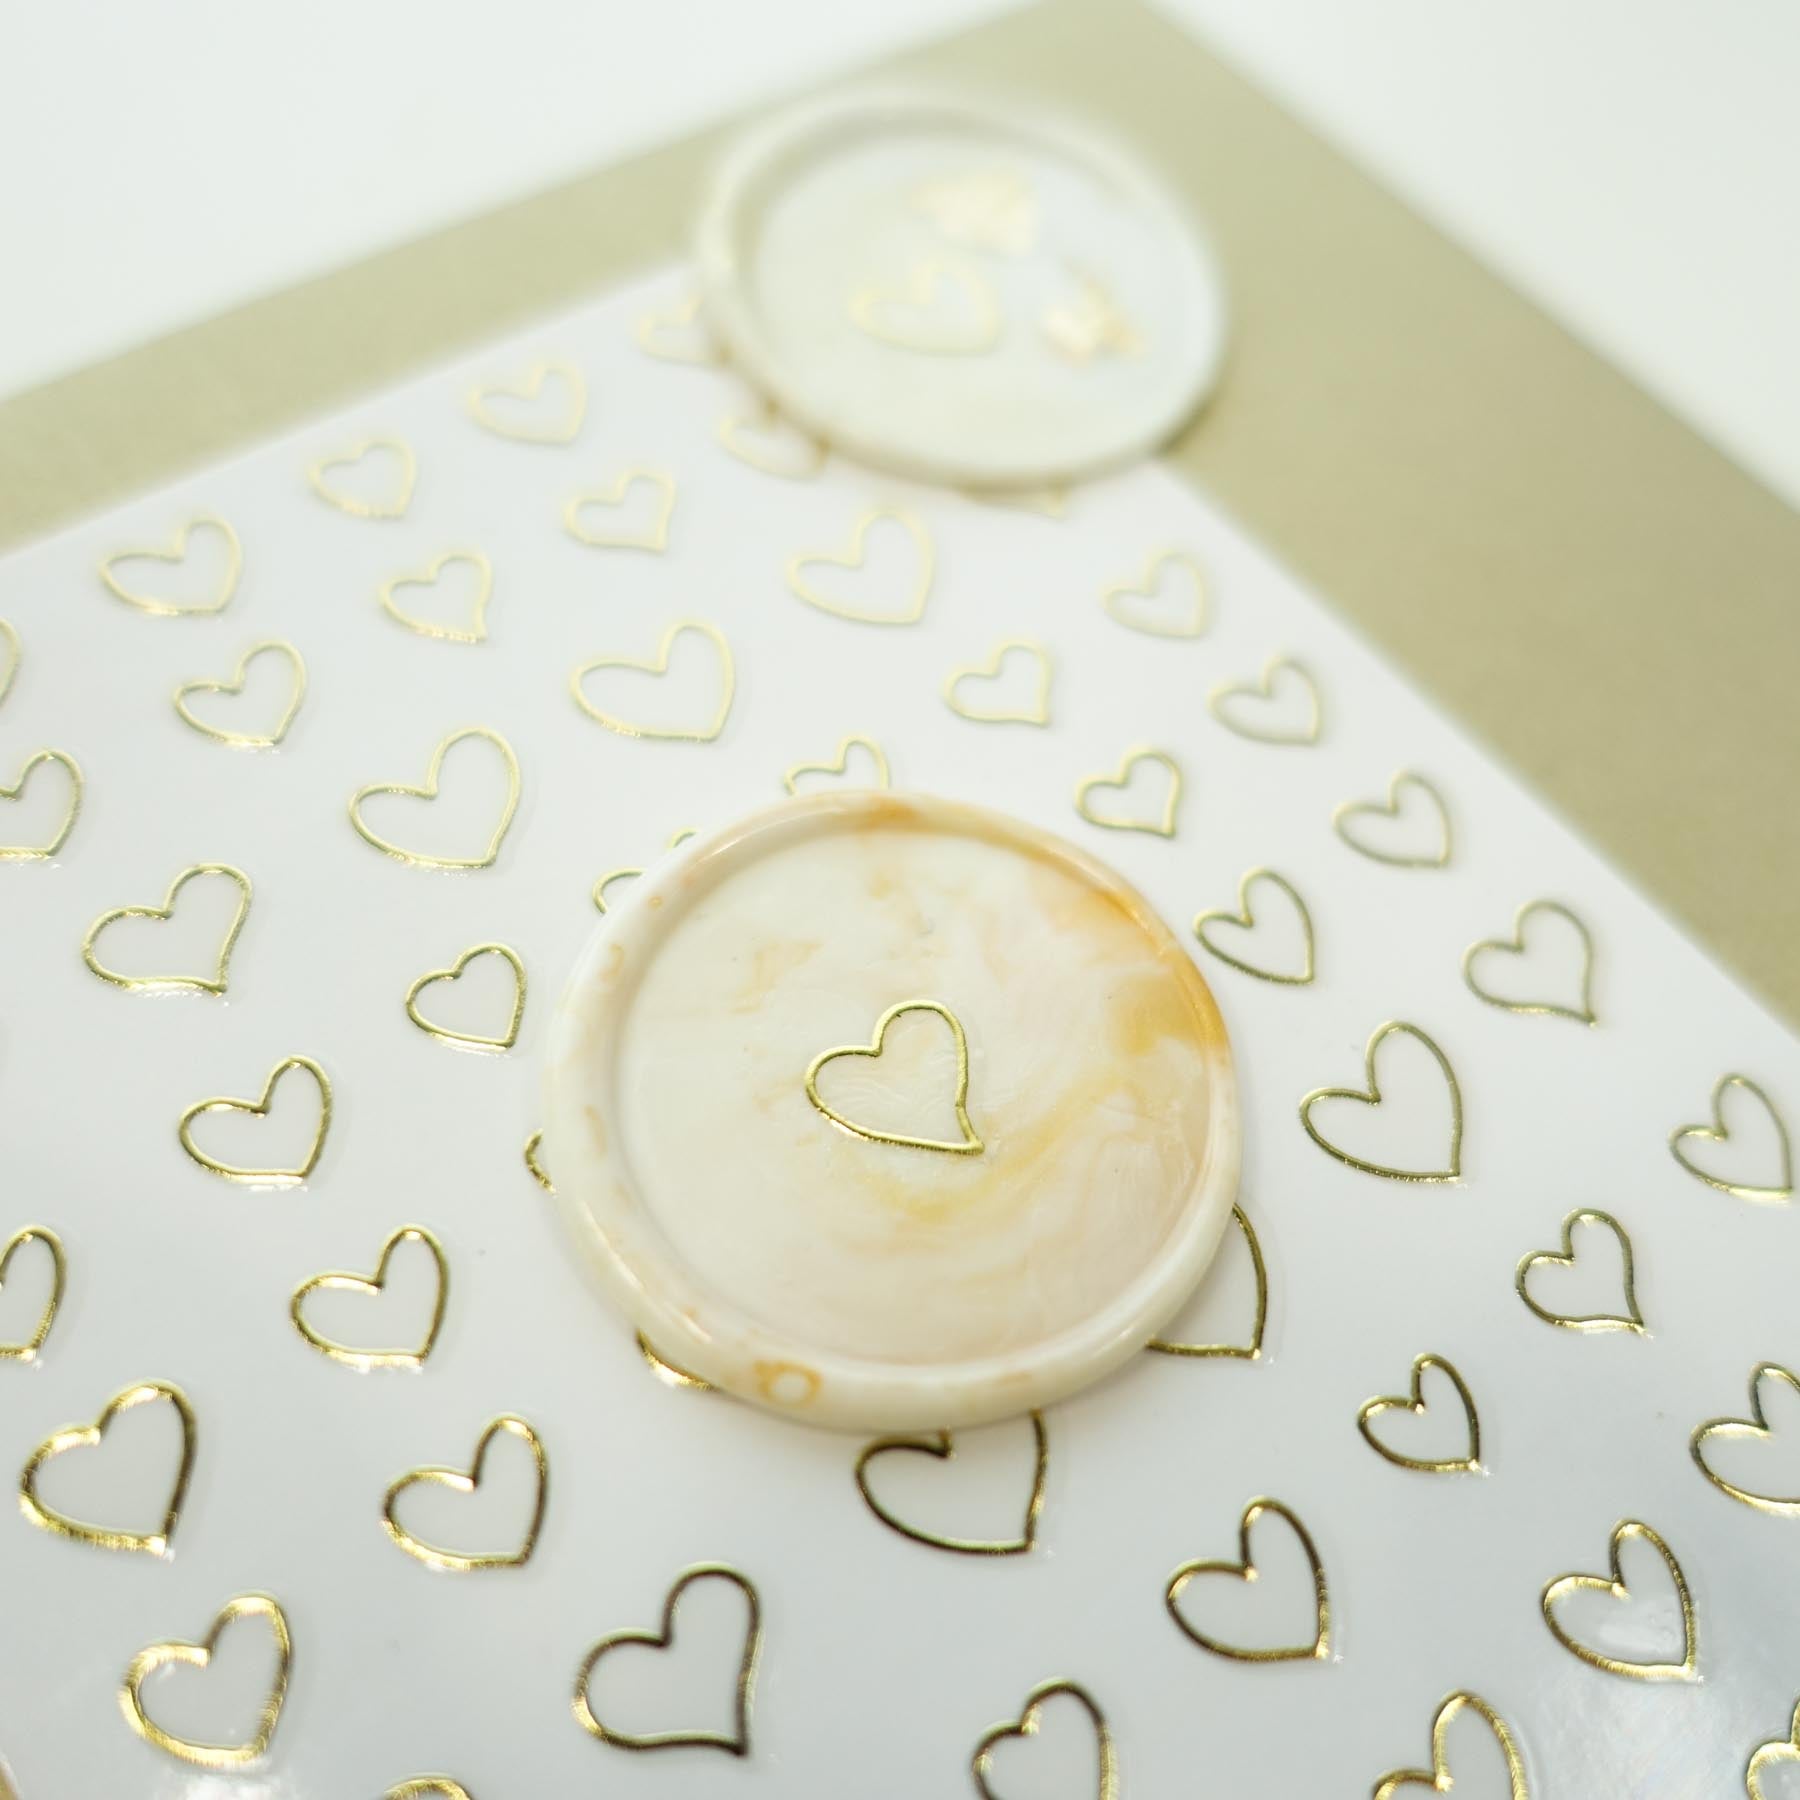 Gold Heart Outlines Clear-Backed Decorative Stickers Sheet